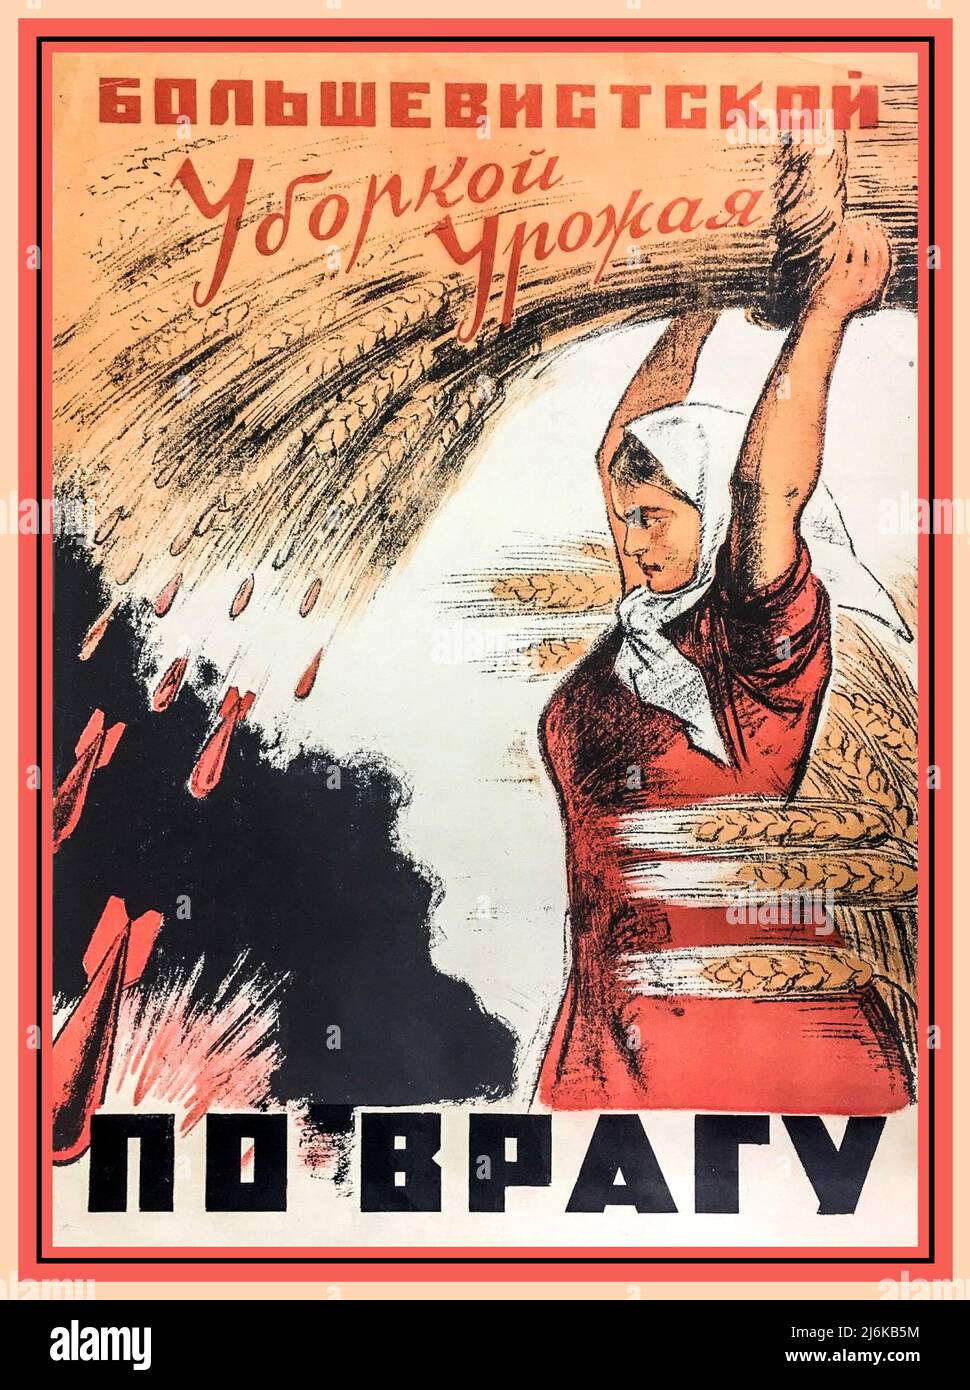 Russian Grain Wheat Harvest 1940s WW2 Propaganda Russia War Effort Output Poster 1941. Bolshevik harvest, “FIGHT THE ENEMY! Food to aid The War Effort. Harvests into Bombs” . “Bolshevists, throw your harvest at the enemy!” -Soviet Union Russia USSR. World War II Second World War with Nazi Germany Stock Photo